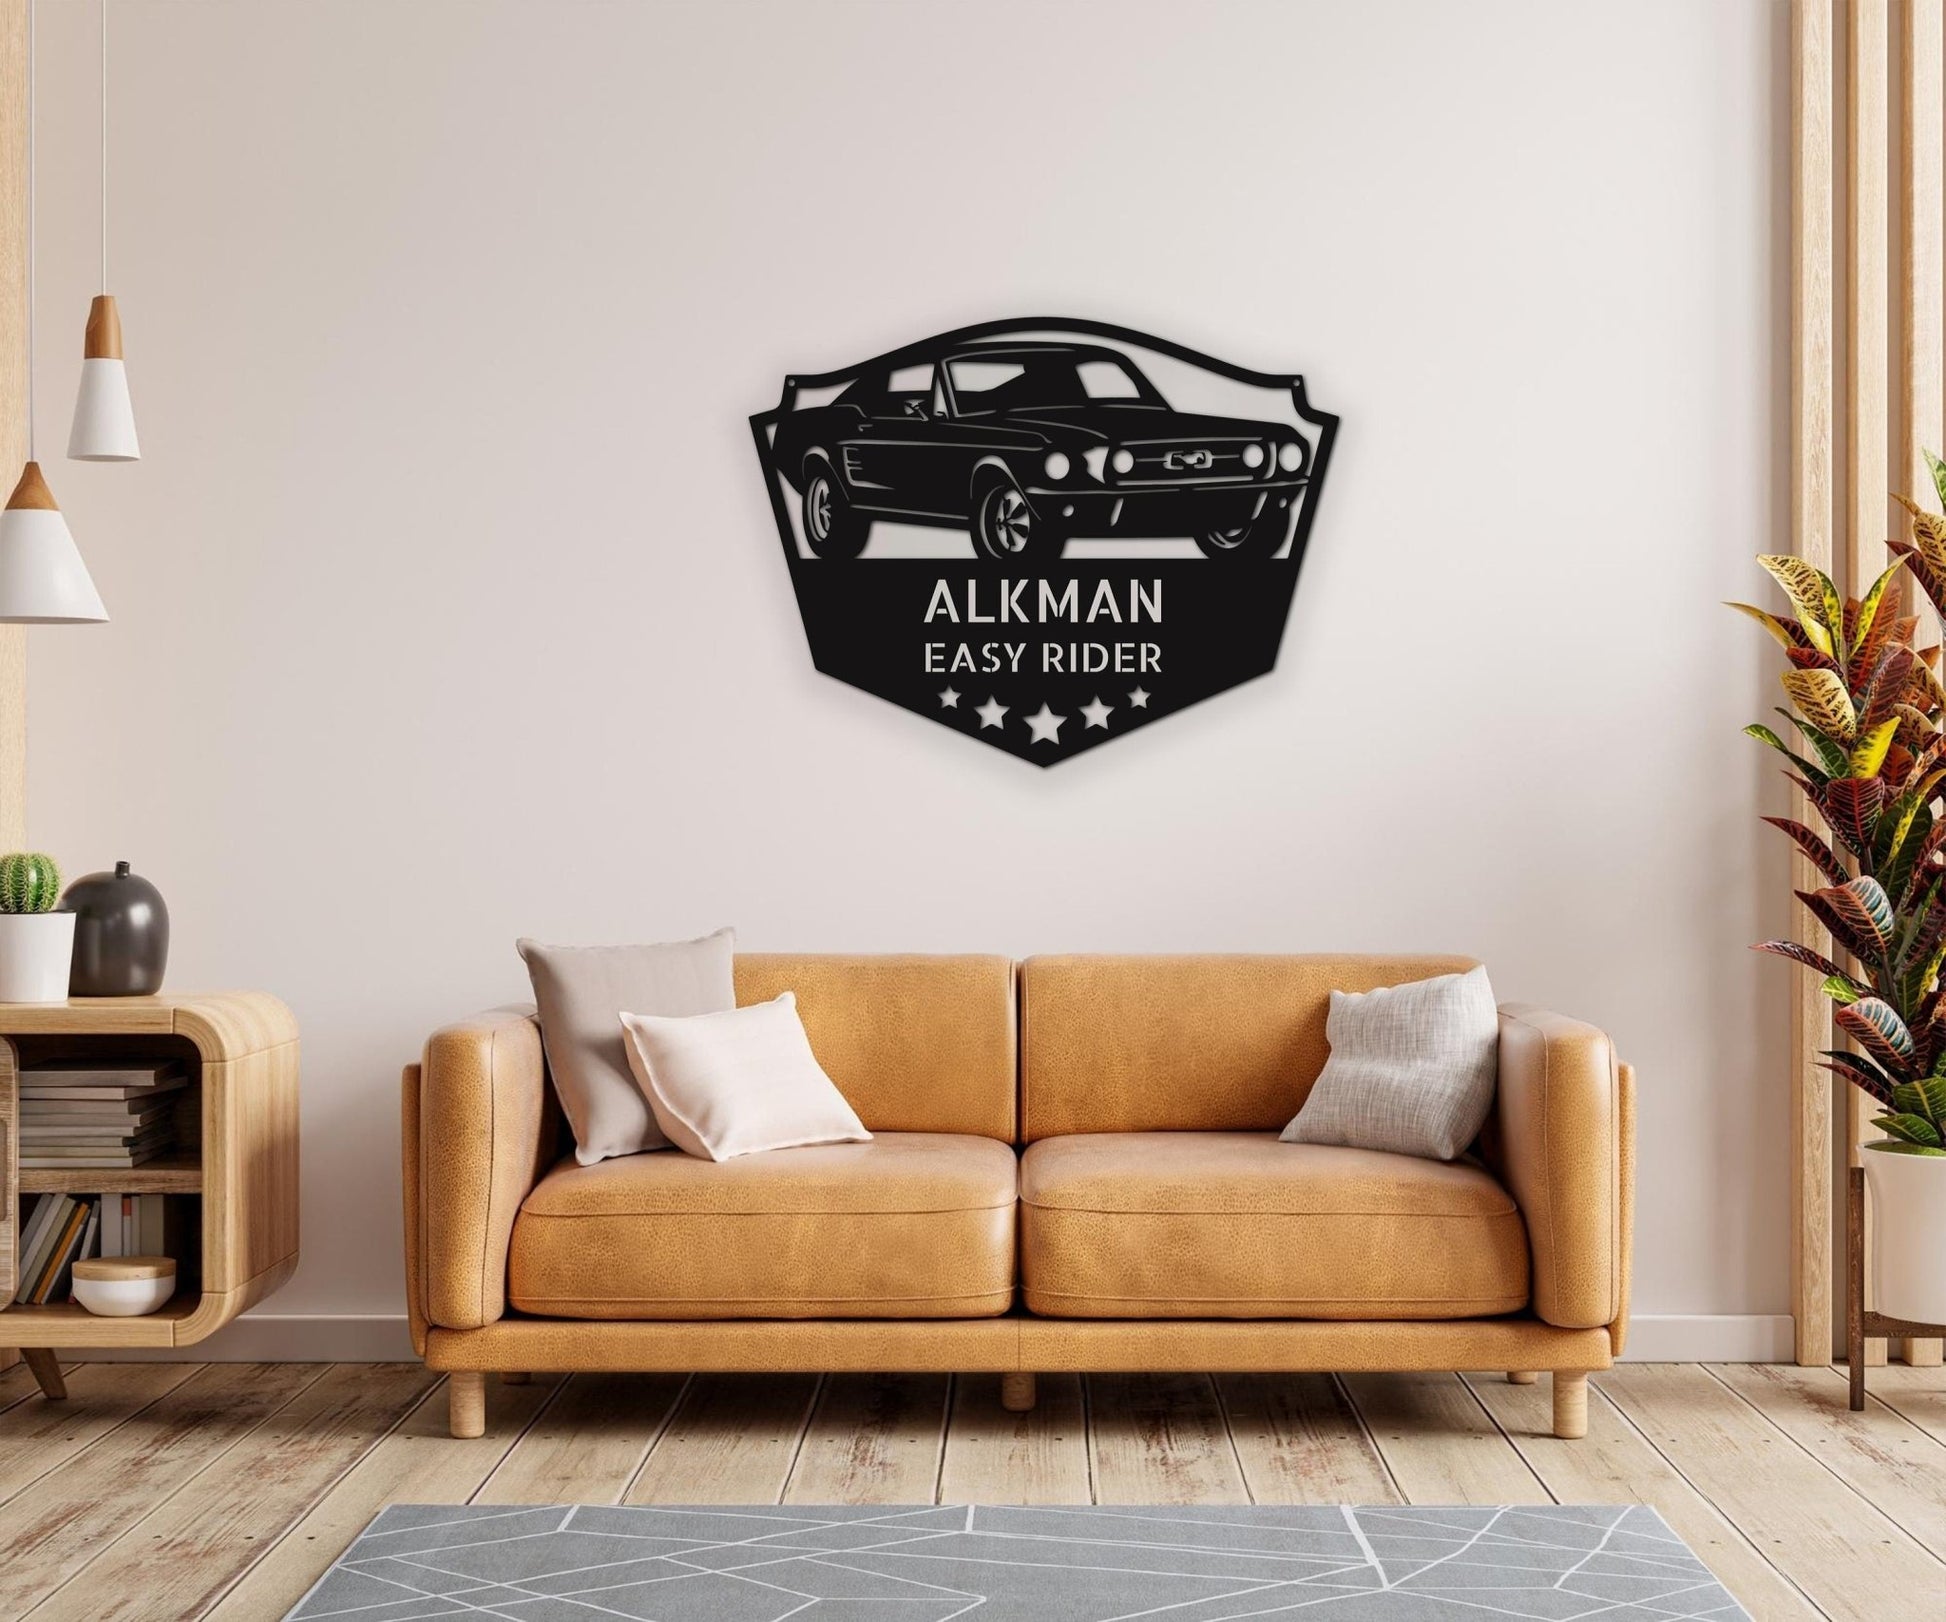 Ford Mustang Garage Decor - Mustang Metal Art Sign - Classic Ford Mustang Wall Sign - Stylinsoul